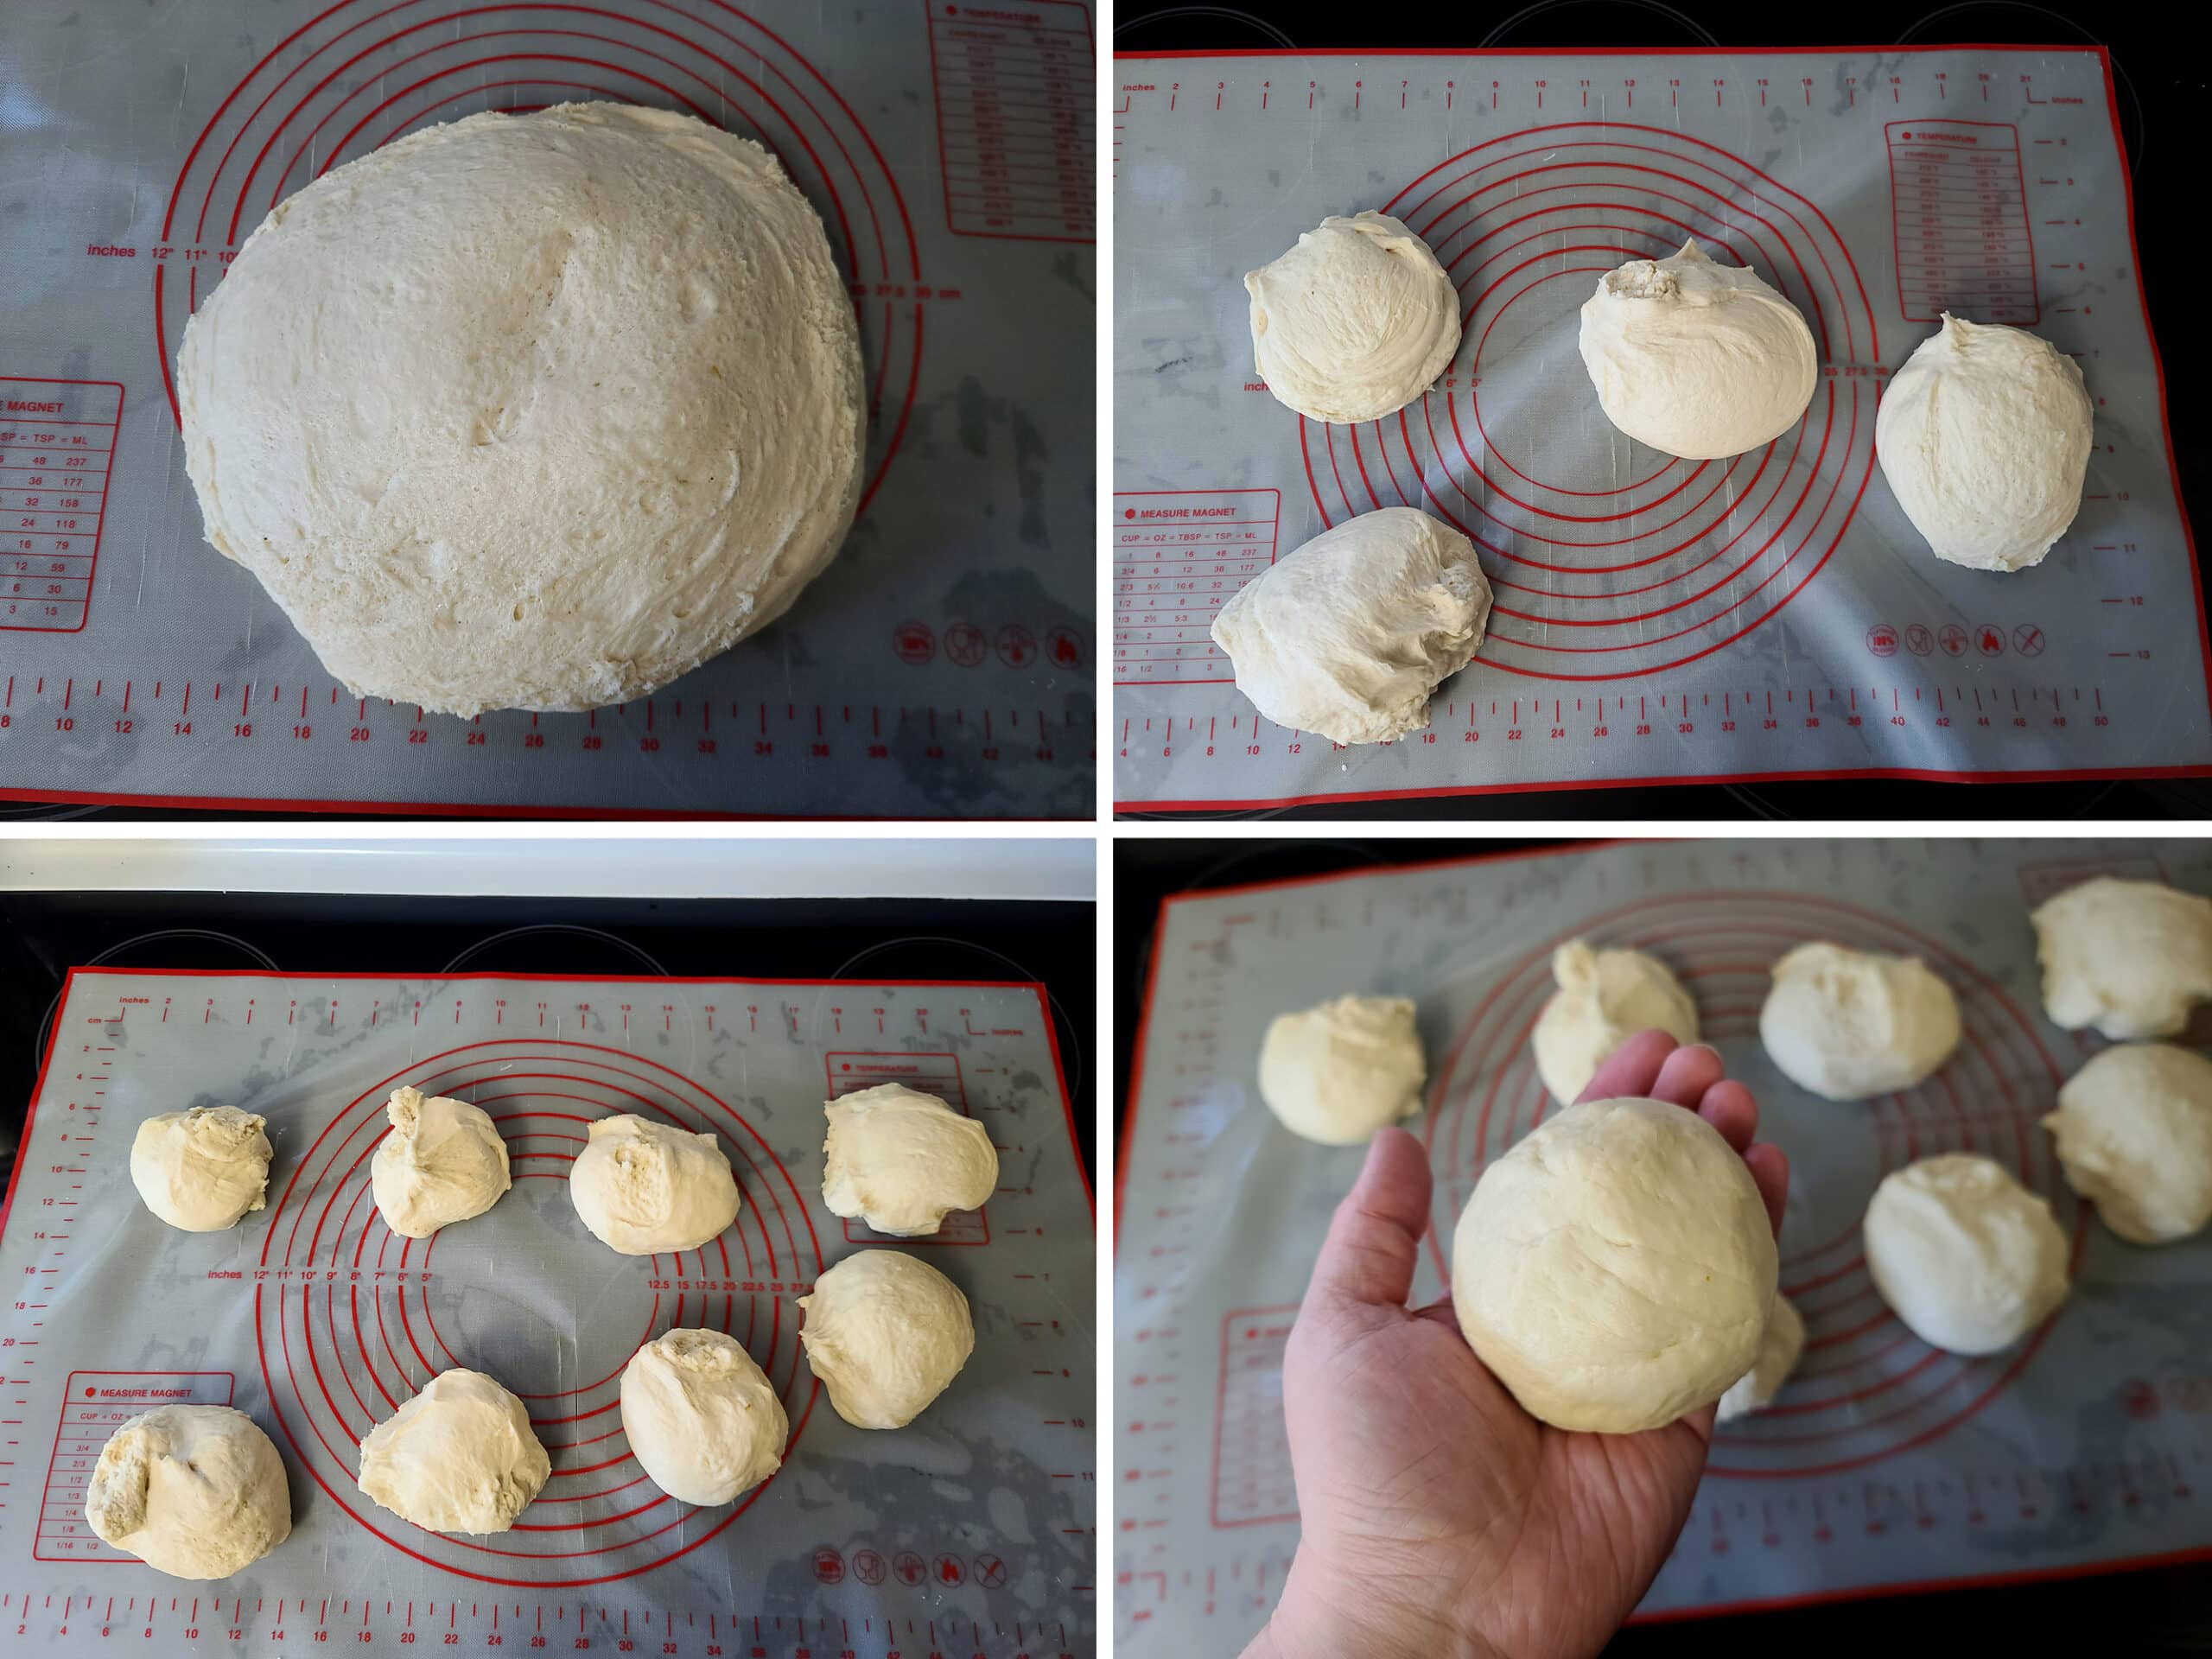 A 4 part image showing the dough ball being divided into 8 pieces and rolled into smooth balls.